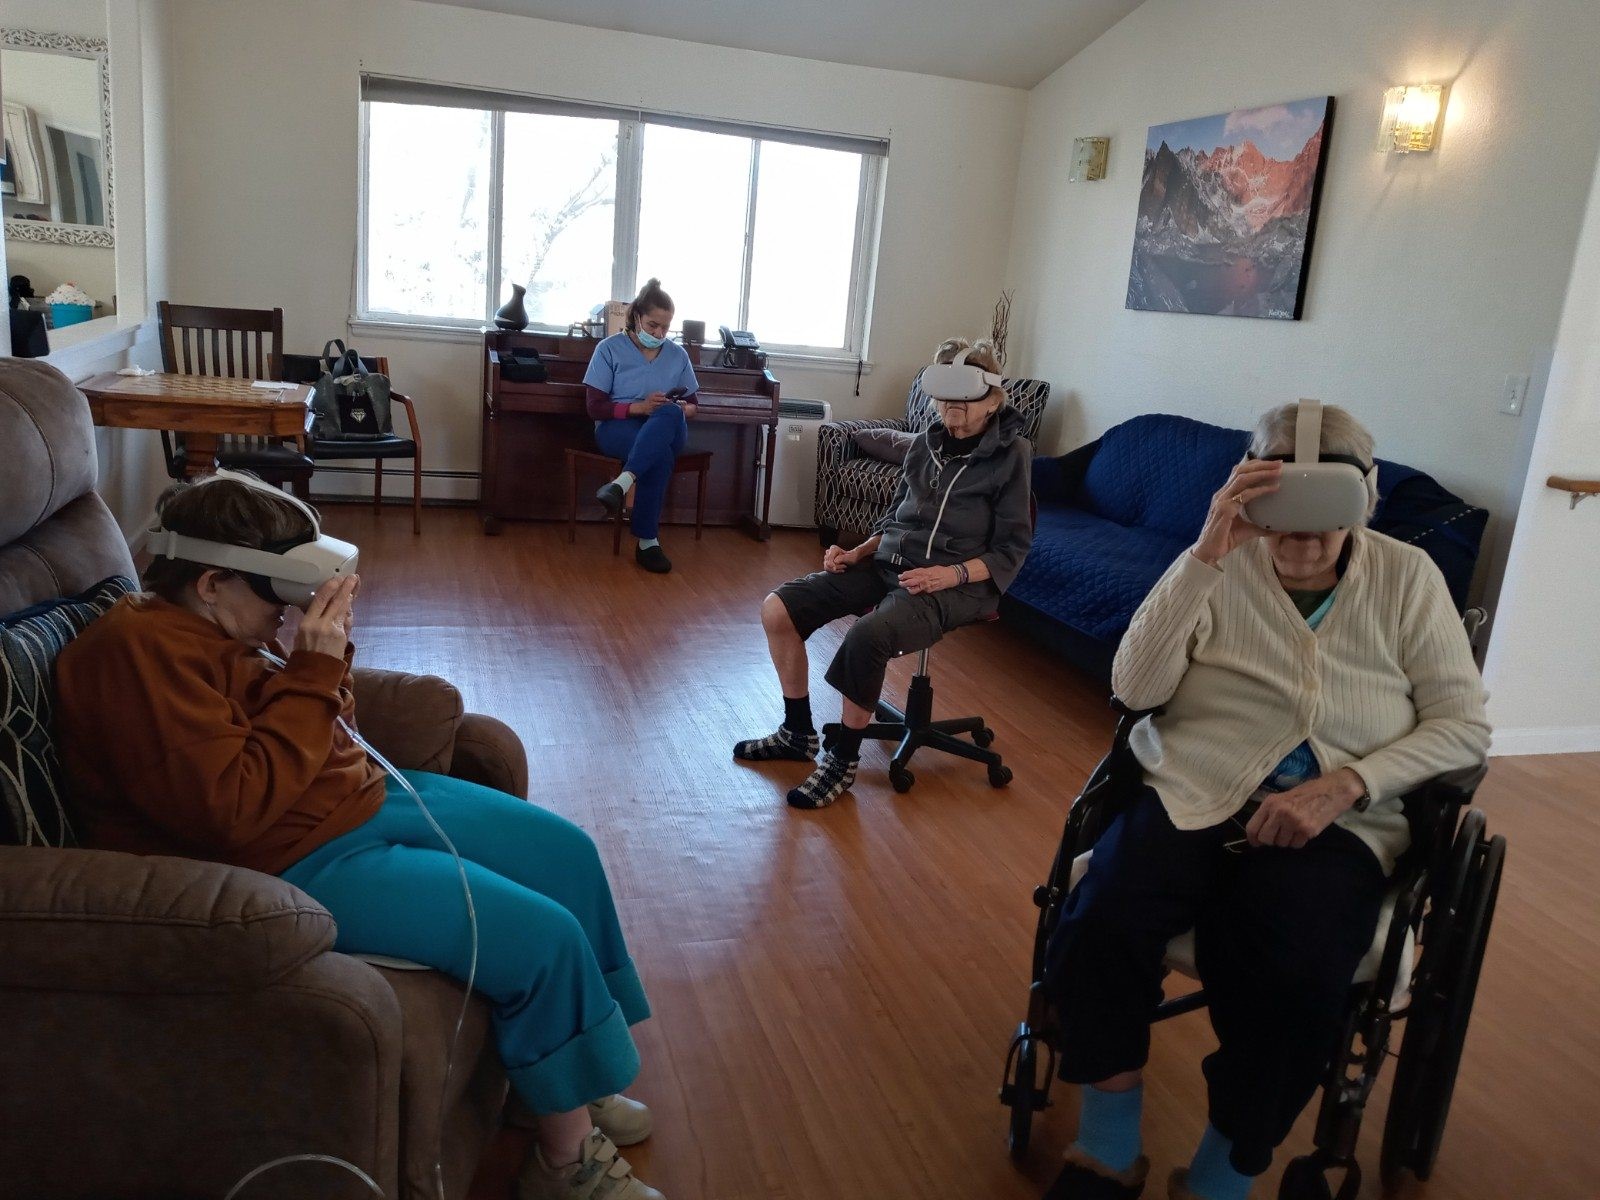 VR headsets in use at senior home